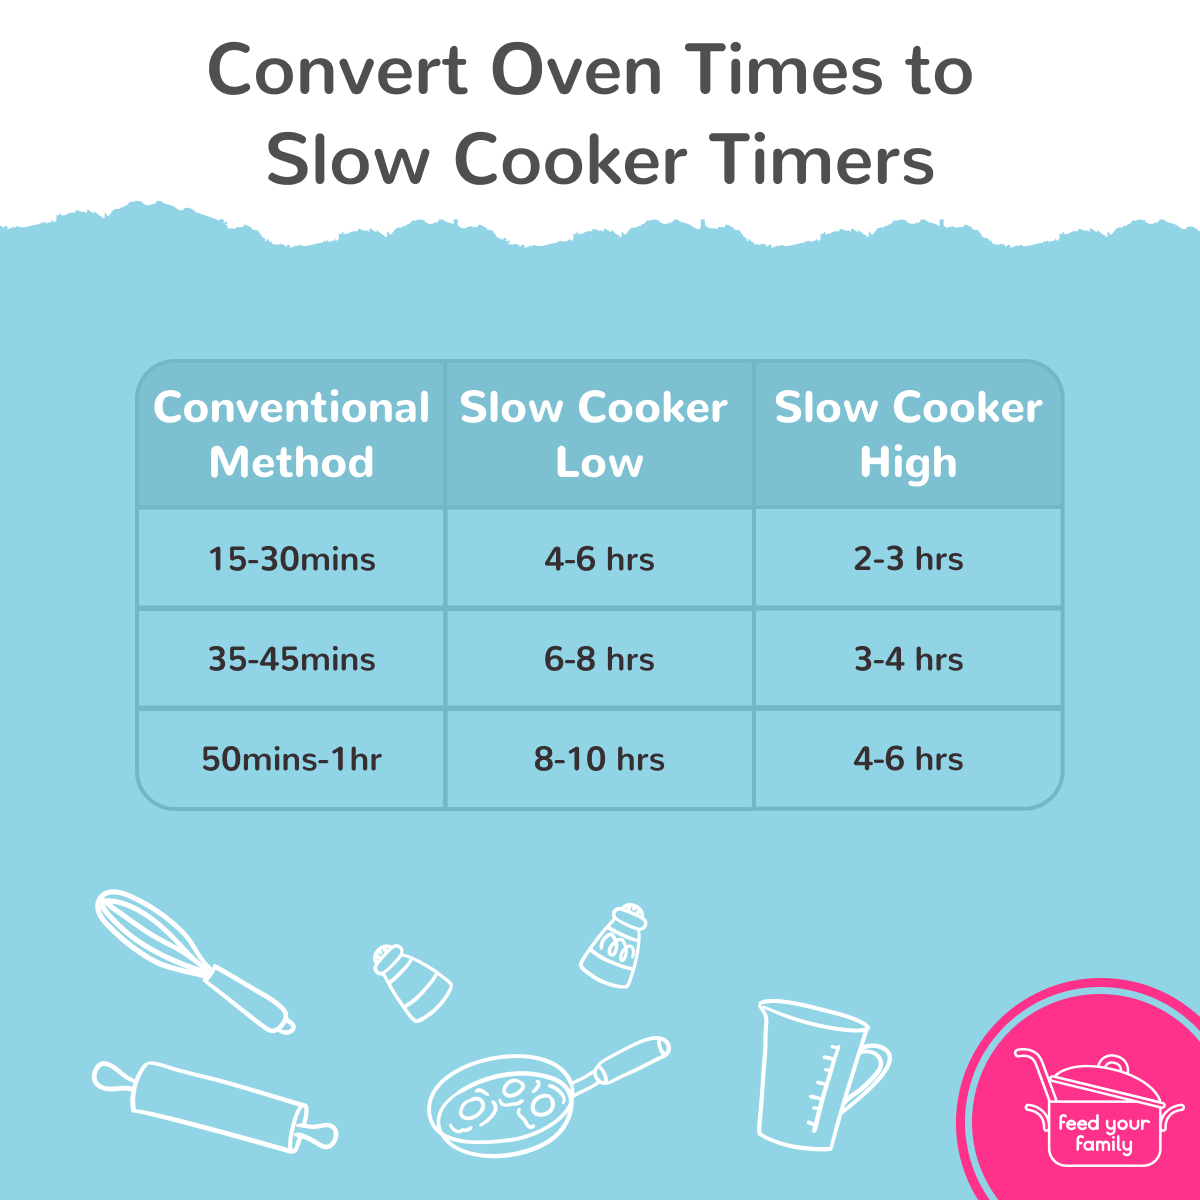 oven-to-slow-cooker-times-feed-your-family-for-20-a-week